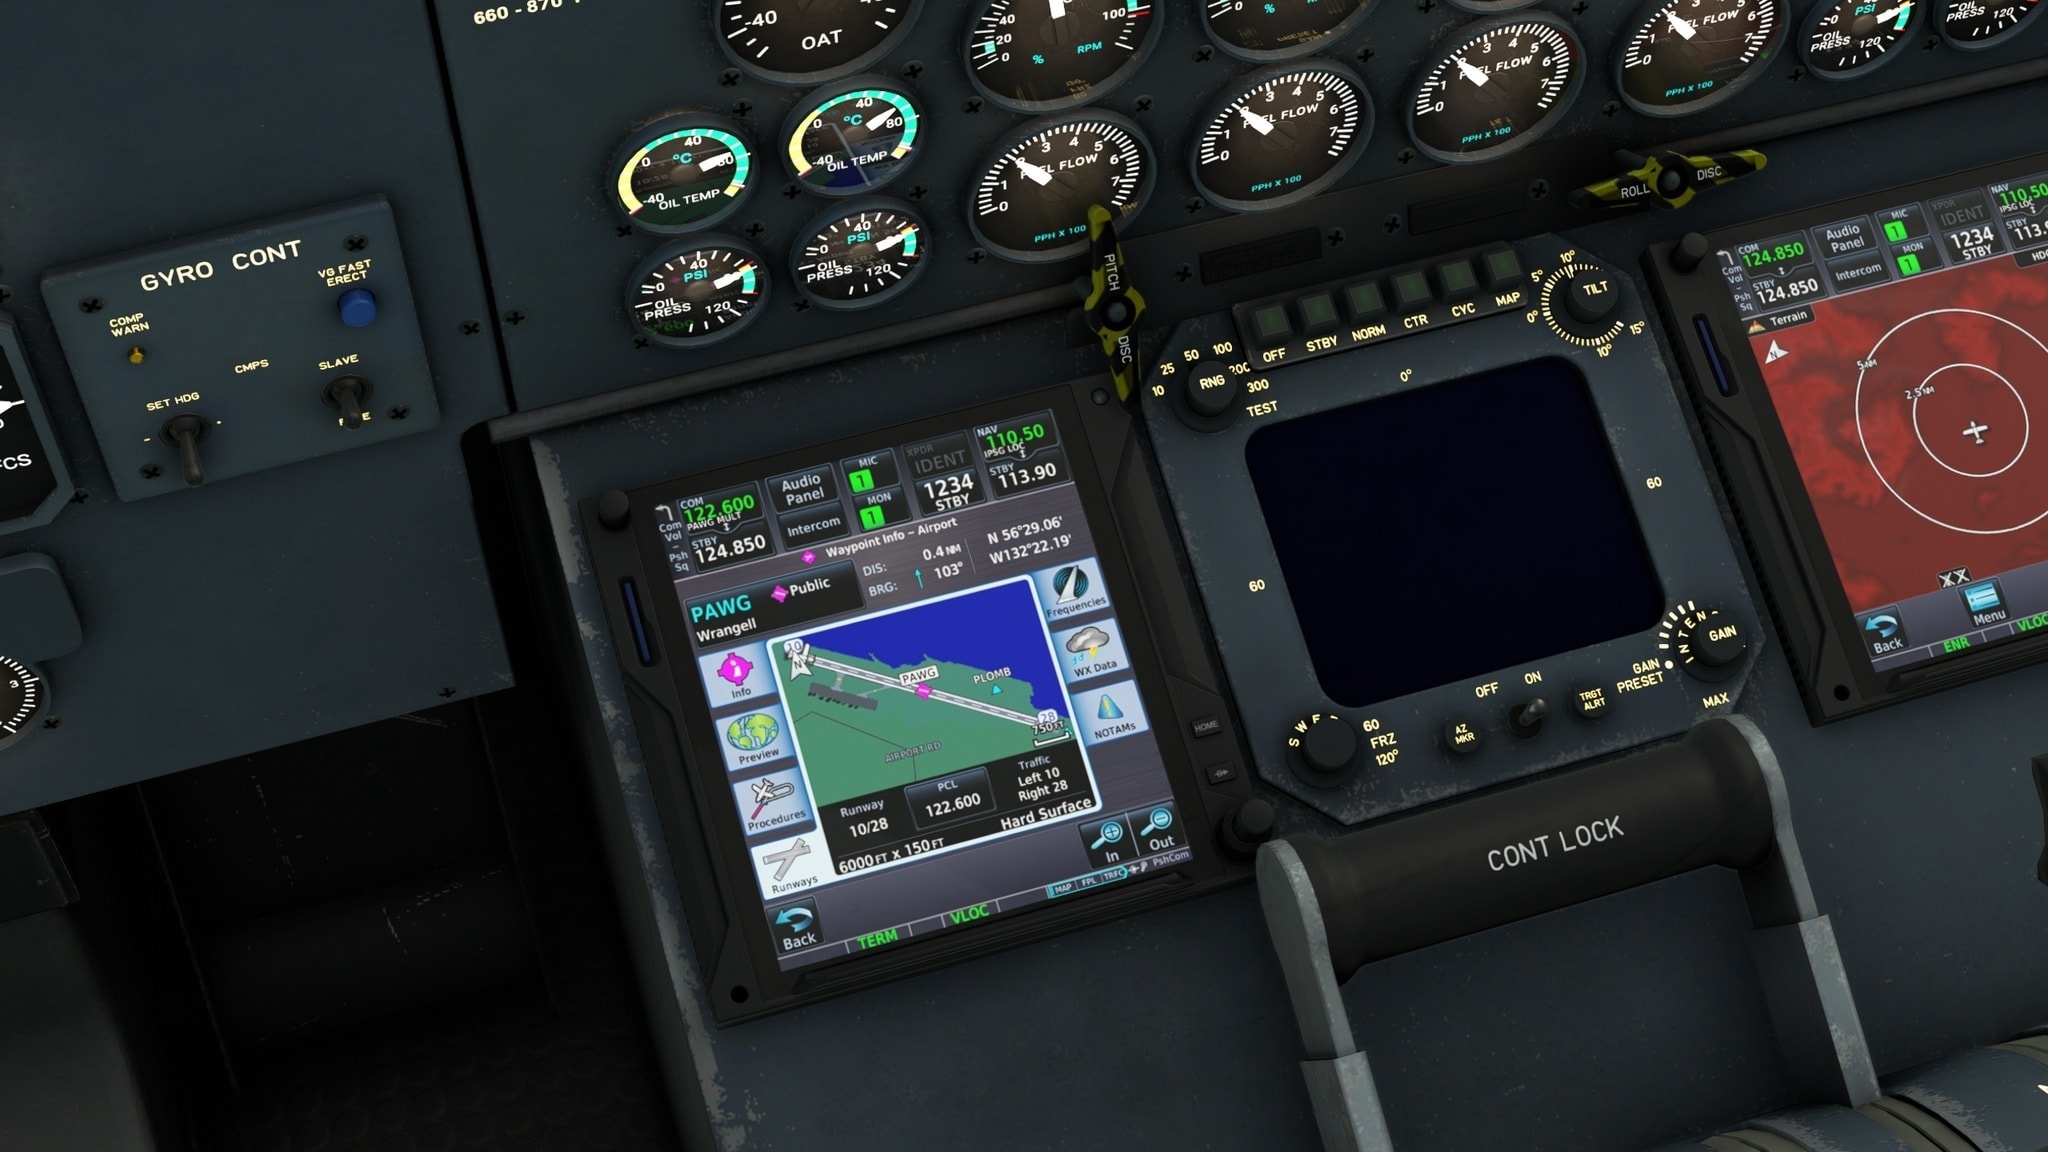 Dash 7 for MSFS by PILOT's